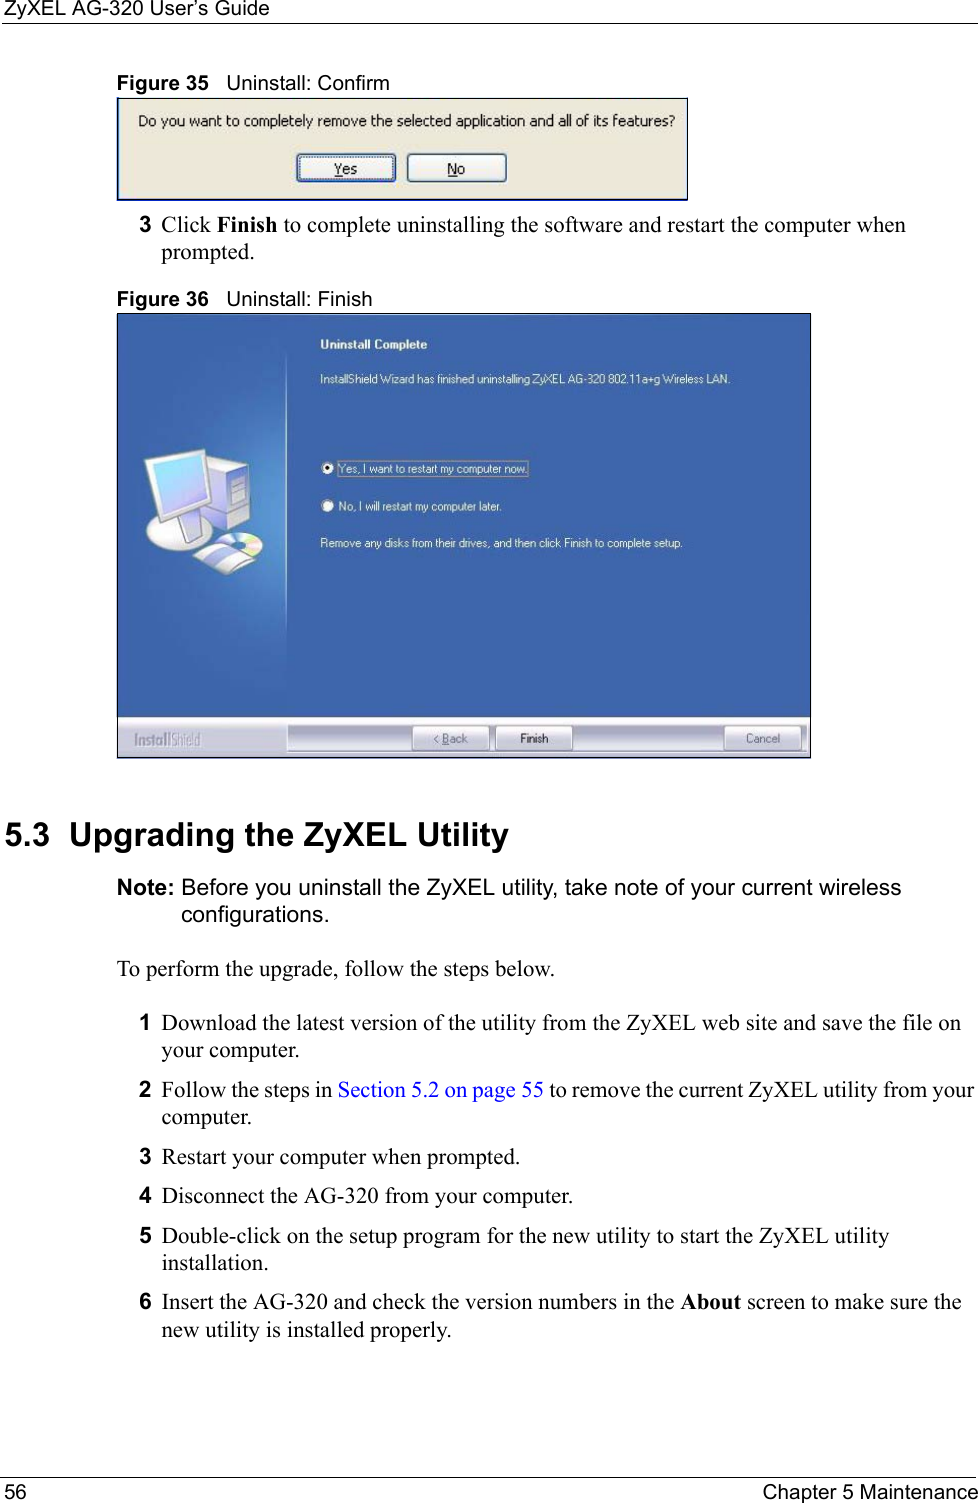 ZyXEL AG-320 User’s Guide56 Chapter 5 MaintenanceFigure 35   Uninstall: Confirm  3Click Finish to complete uninstalling the software and restart the computer when prompted.Figure 36   Uninstall: Finish 5.3  Upgrading the ZyXEL Utility Note: Before you uninstall the ZyXEL utility, take note of your current wireless configurations.To perform the upgrade, follow the steps below.1Download the latest version of the utility from the ZyXEL web site and save the file on your computer.2Follow the steps in Section 5.2 on page 55 to remove the current ZyXEL utility from your computer.3Restart your computer when prompted.4Disconnect the AG-320 from your computer.5Double-click on the setup program for the new utility to start the ZyXEL utility installation.6Insert the AG-320 and check the version numbers in the About screen to make sure the new utility is installed properly.